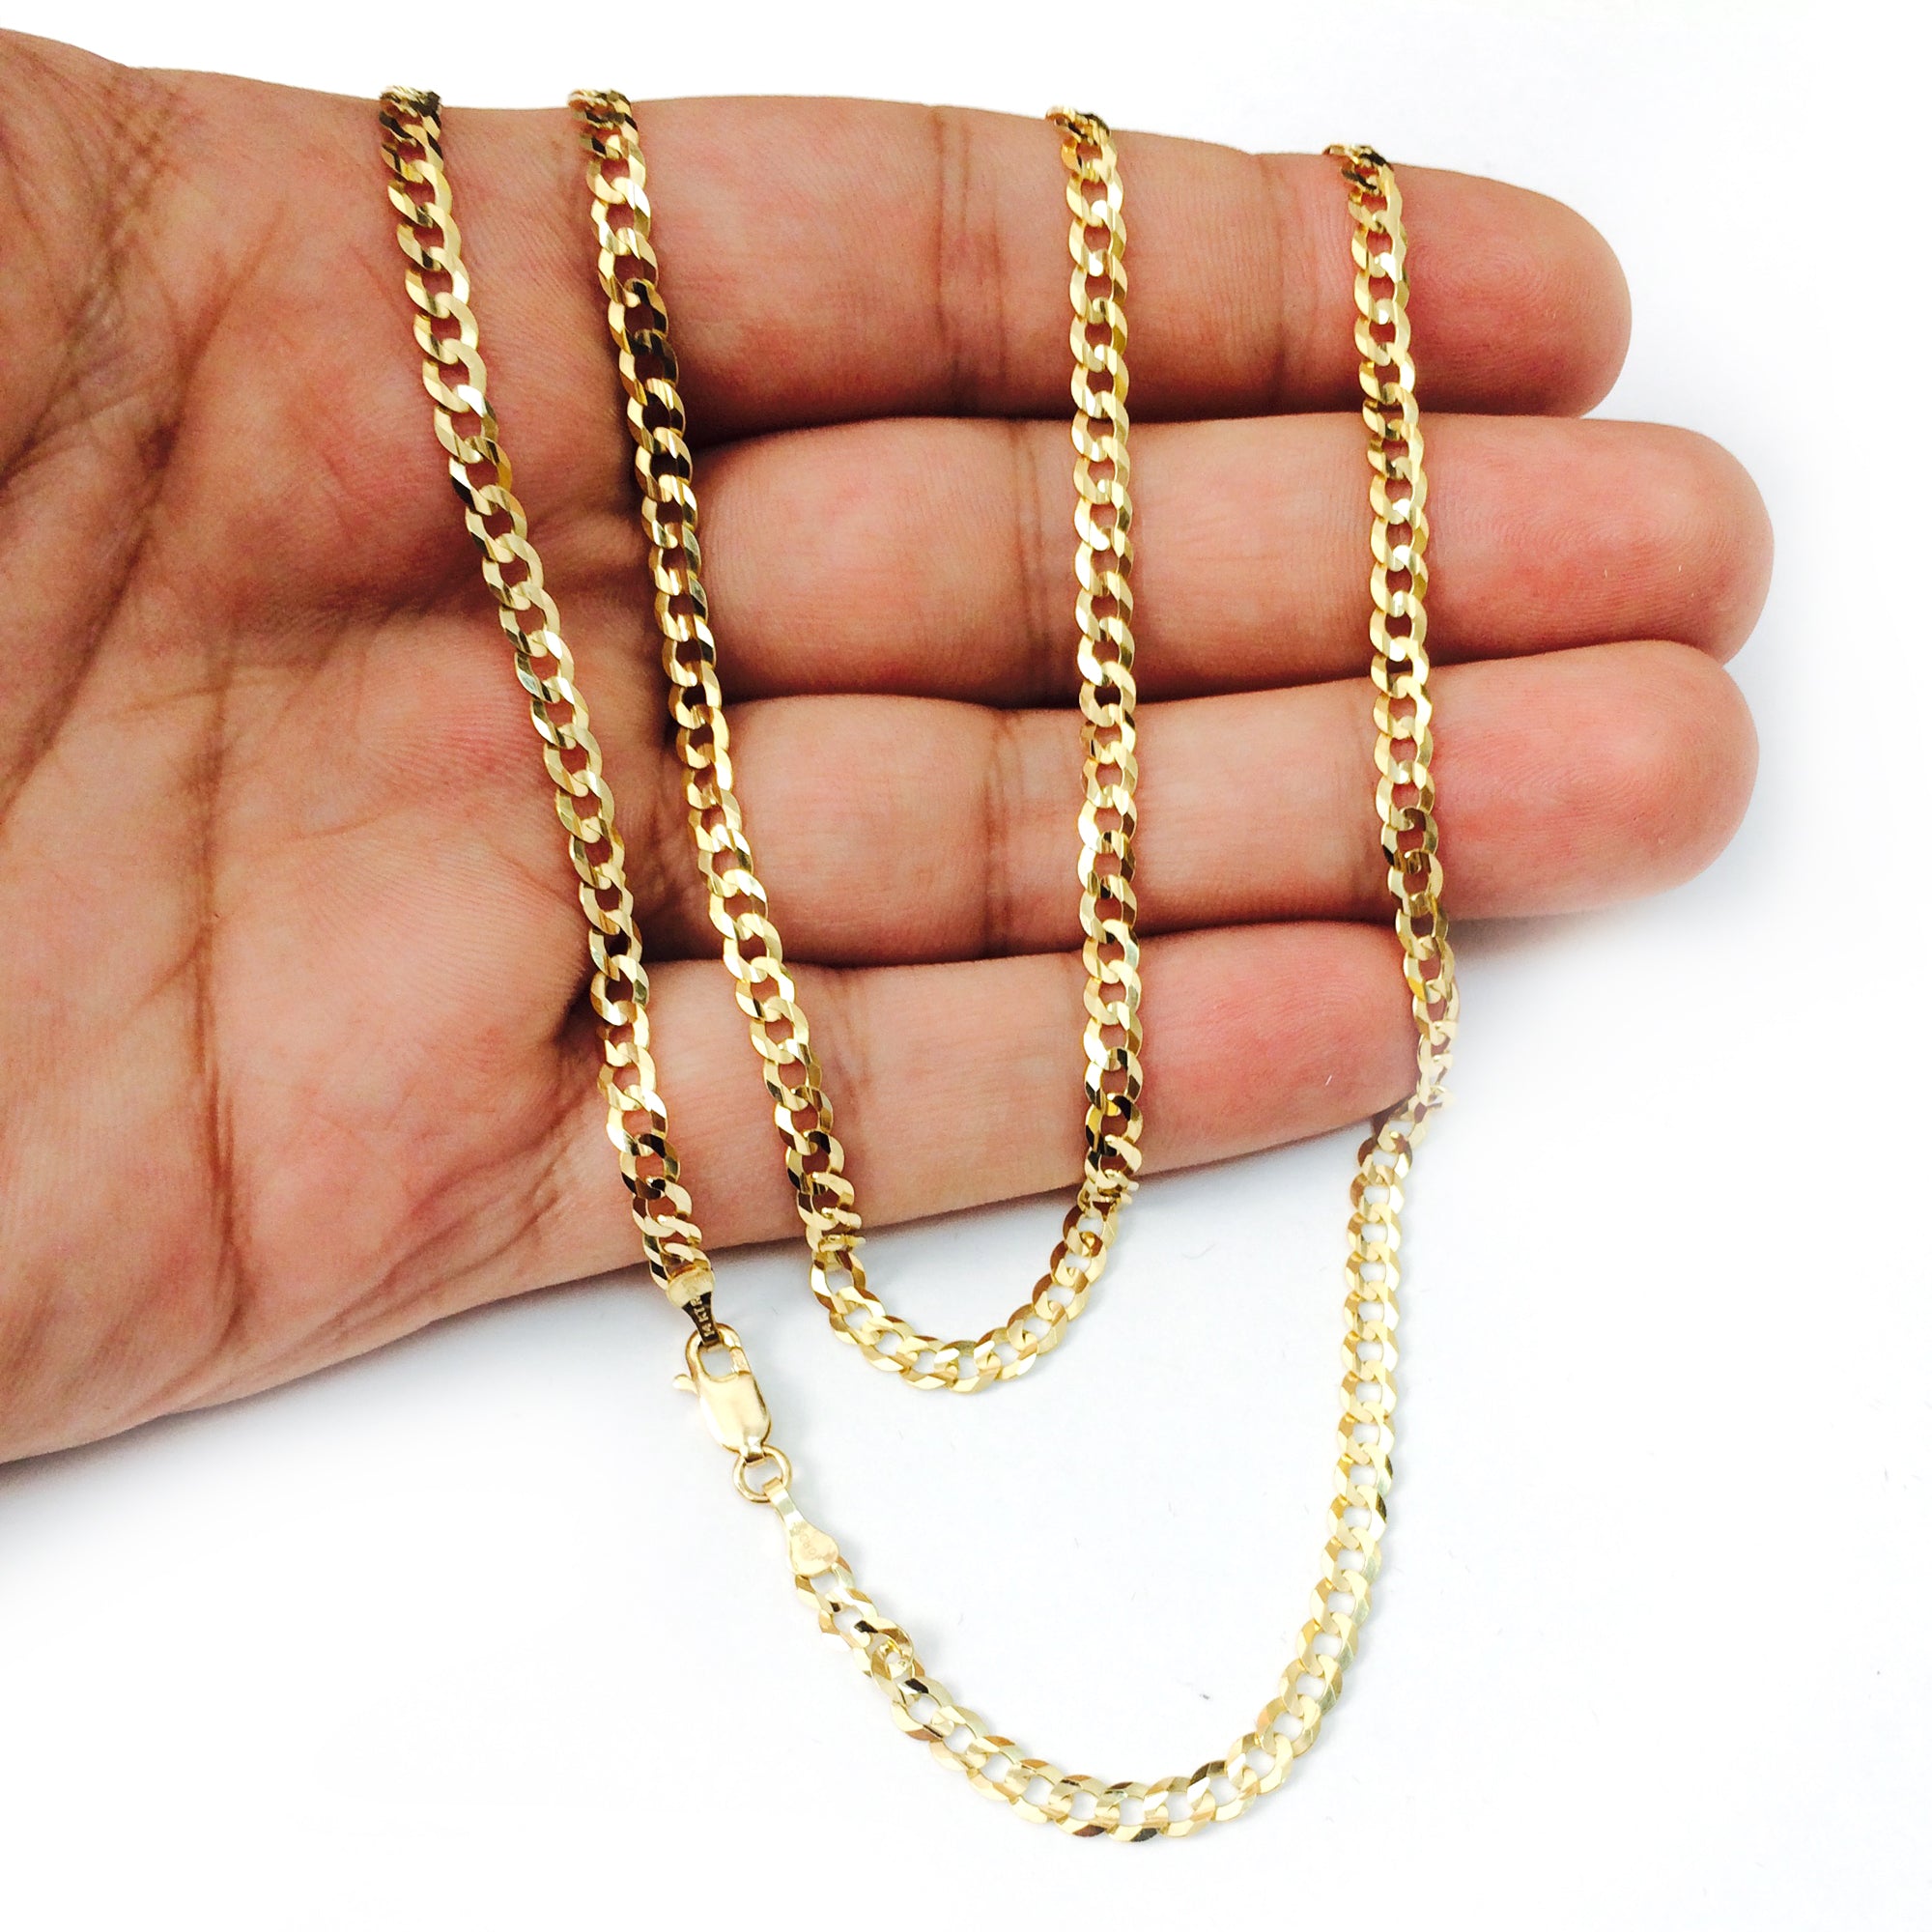 14K Yellow Gold Comfort Curb Chain Necklace, 3.6mm, 18